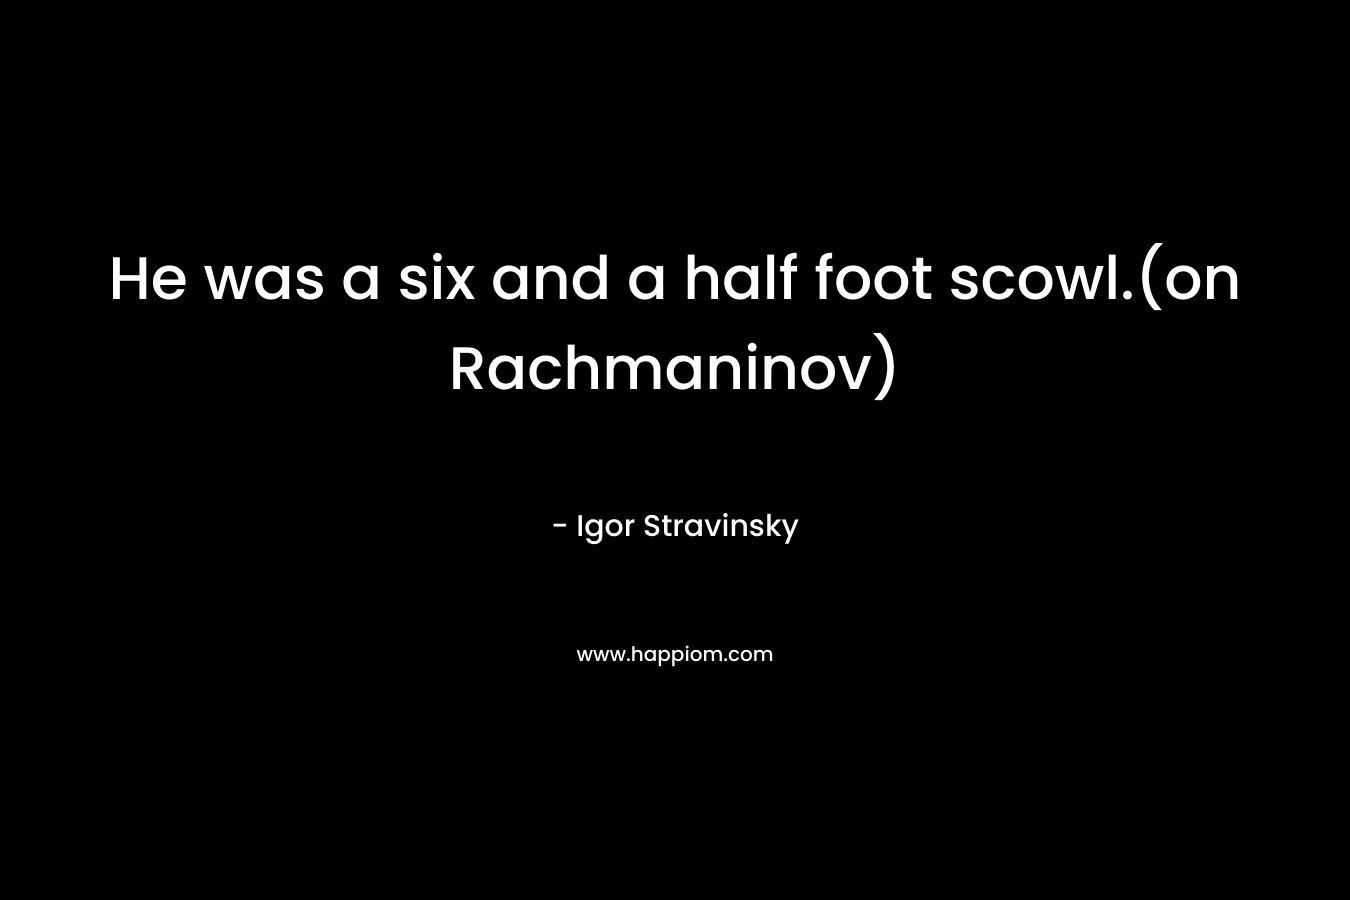 He was a six and a half foot scowl.(on Rachmaninov)